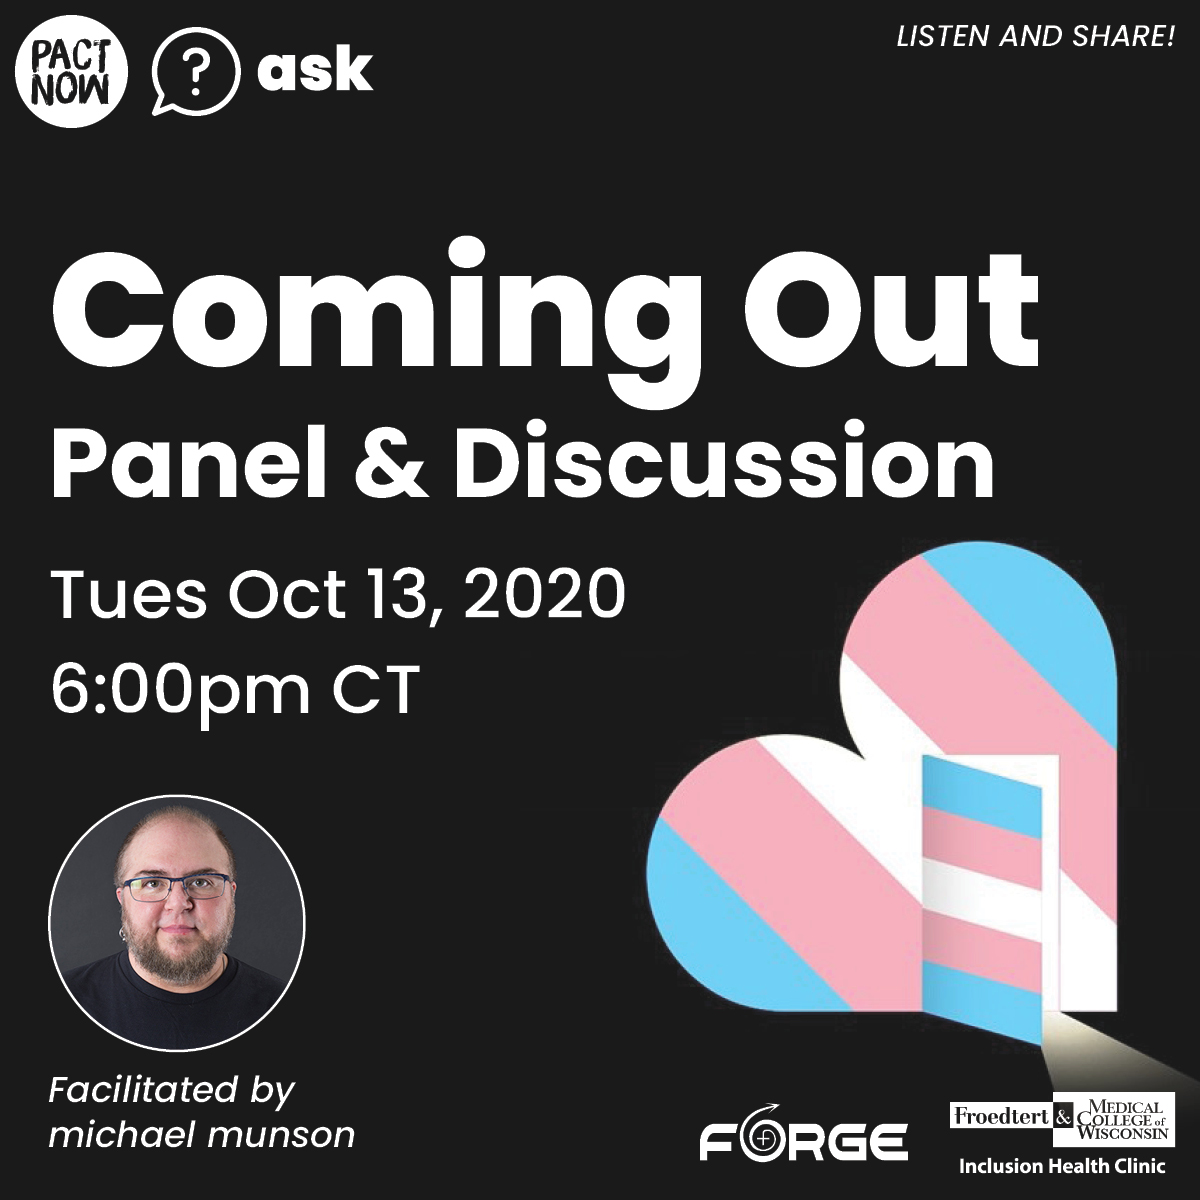 PACT NOW - Coming Out Panel & Discussion square